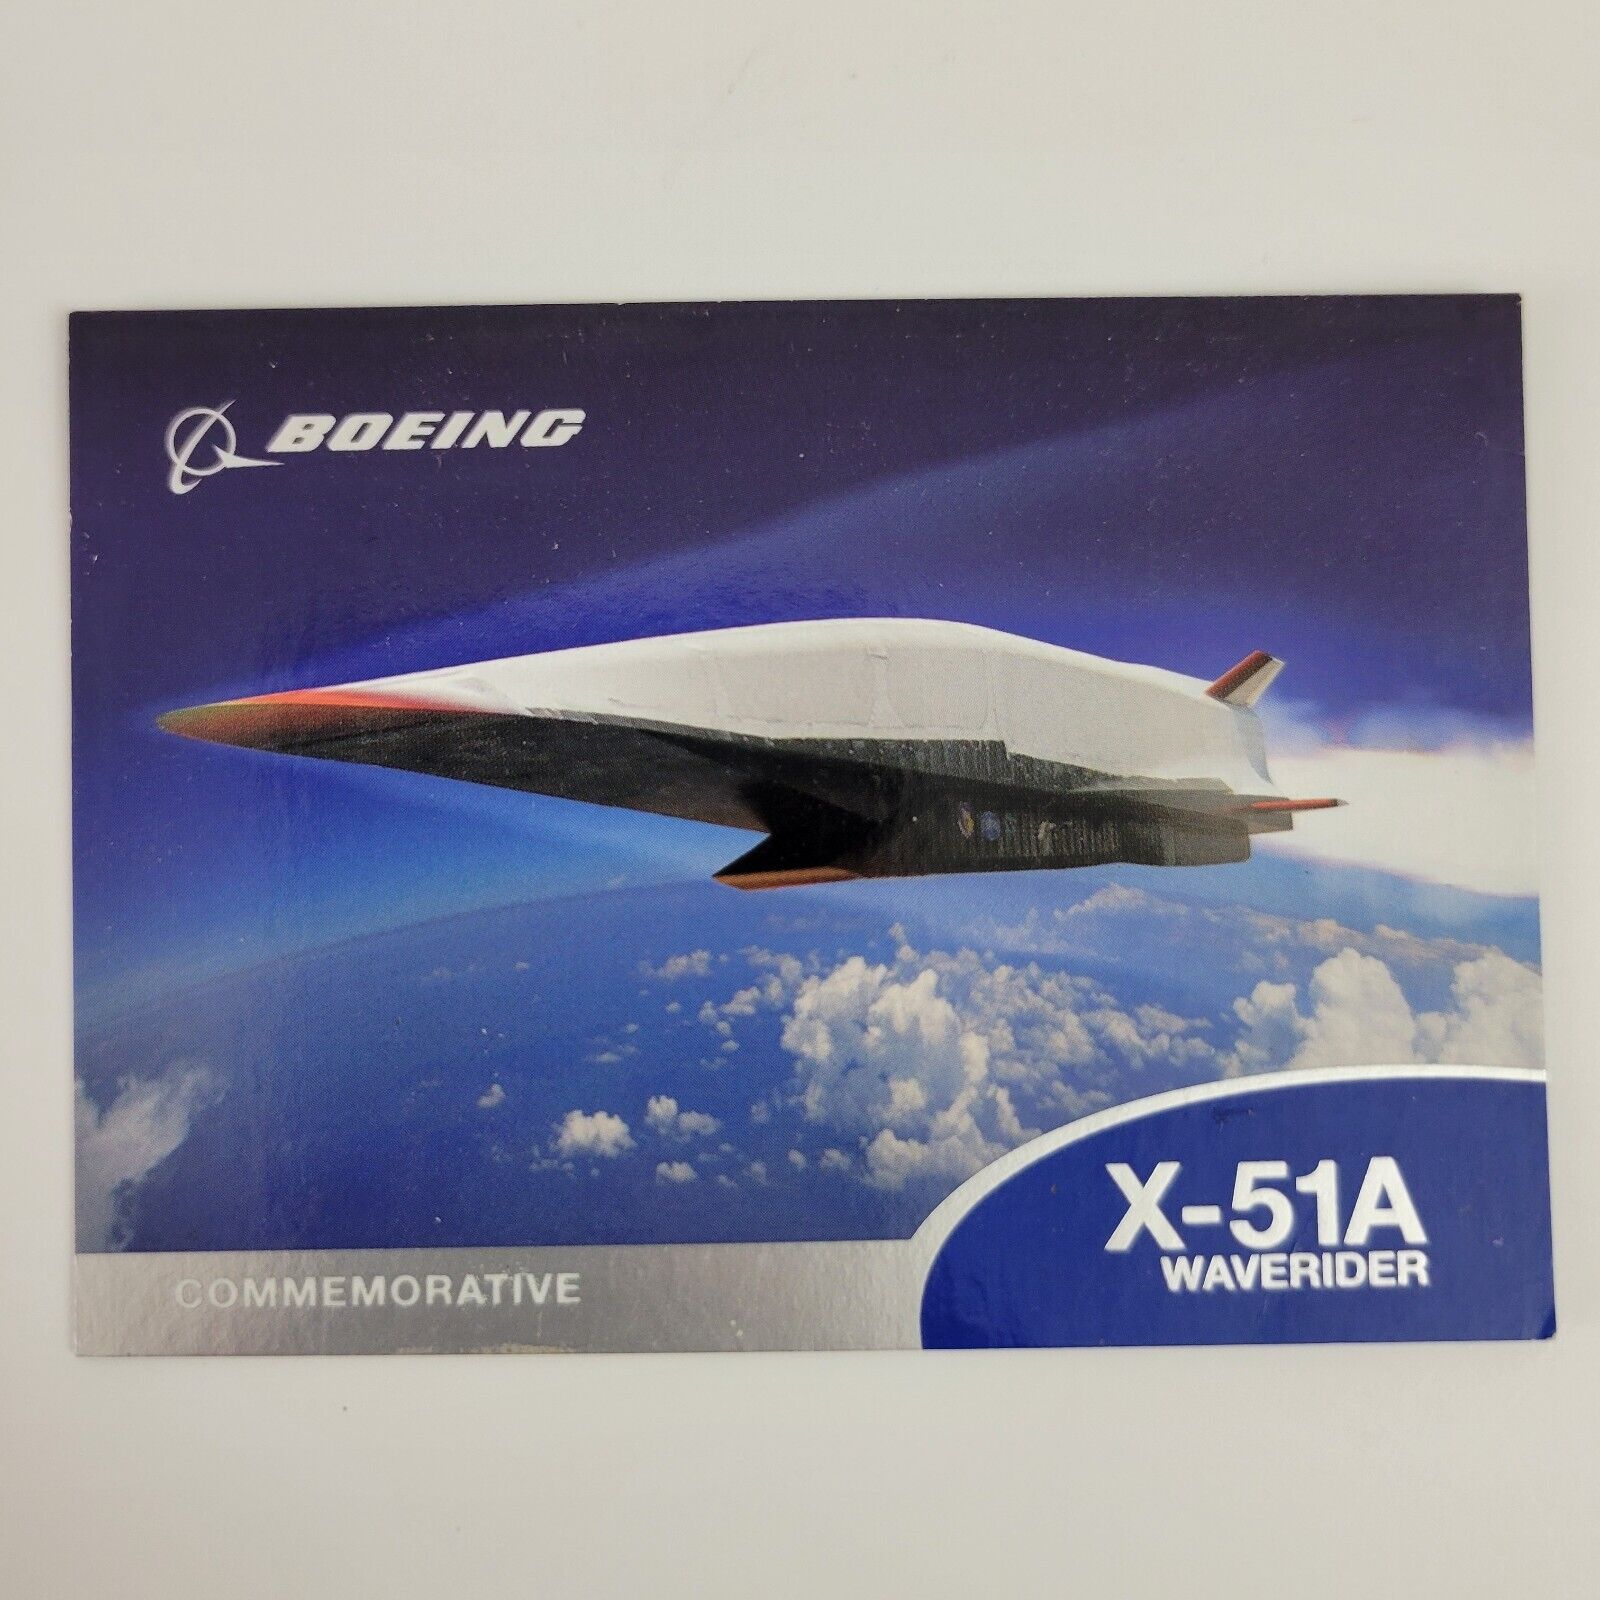 Boeing Trading Card - Waverider X-51A, Commemorative Card